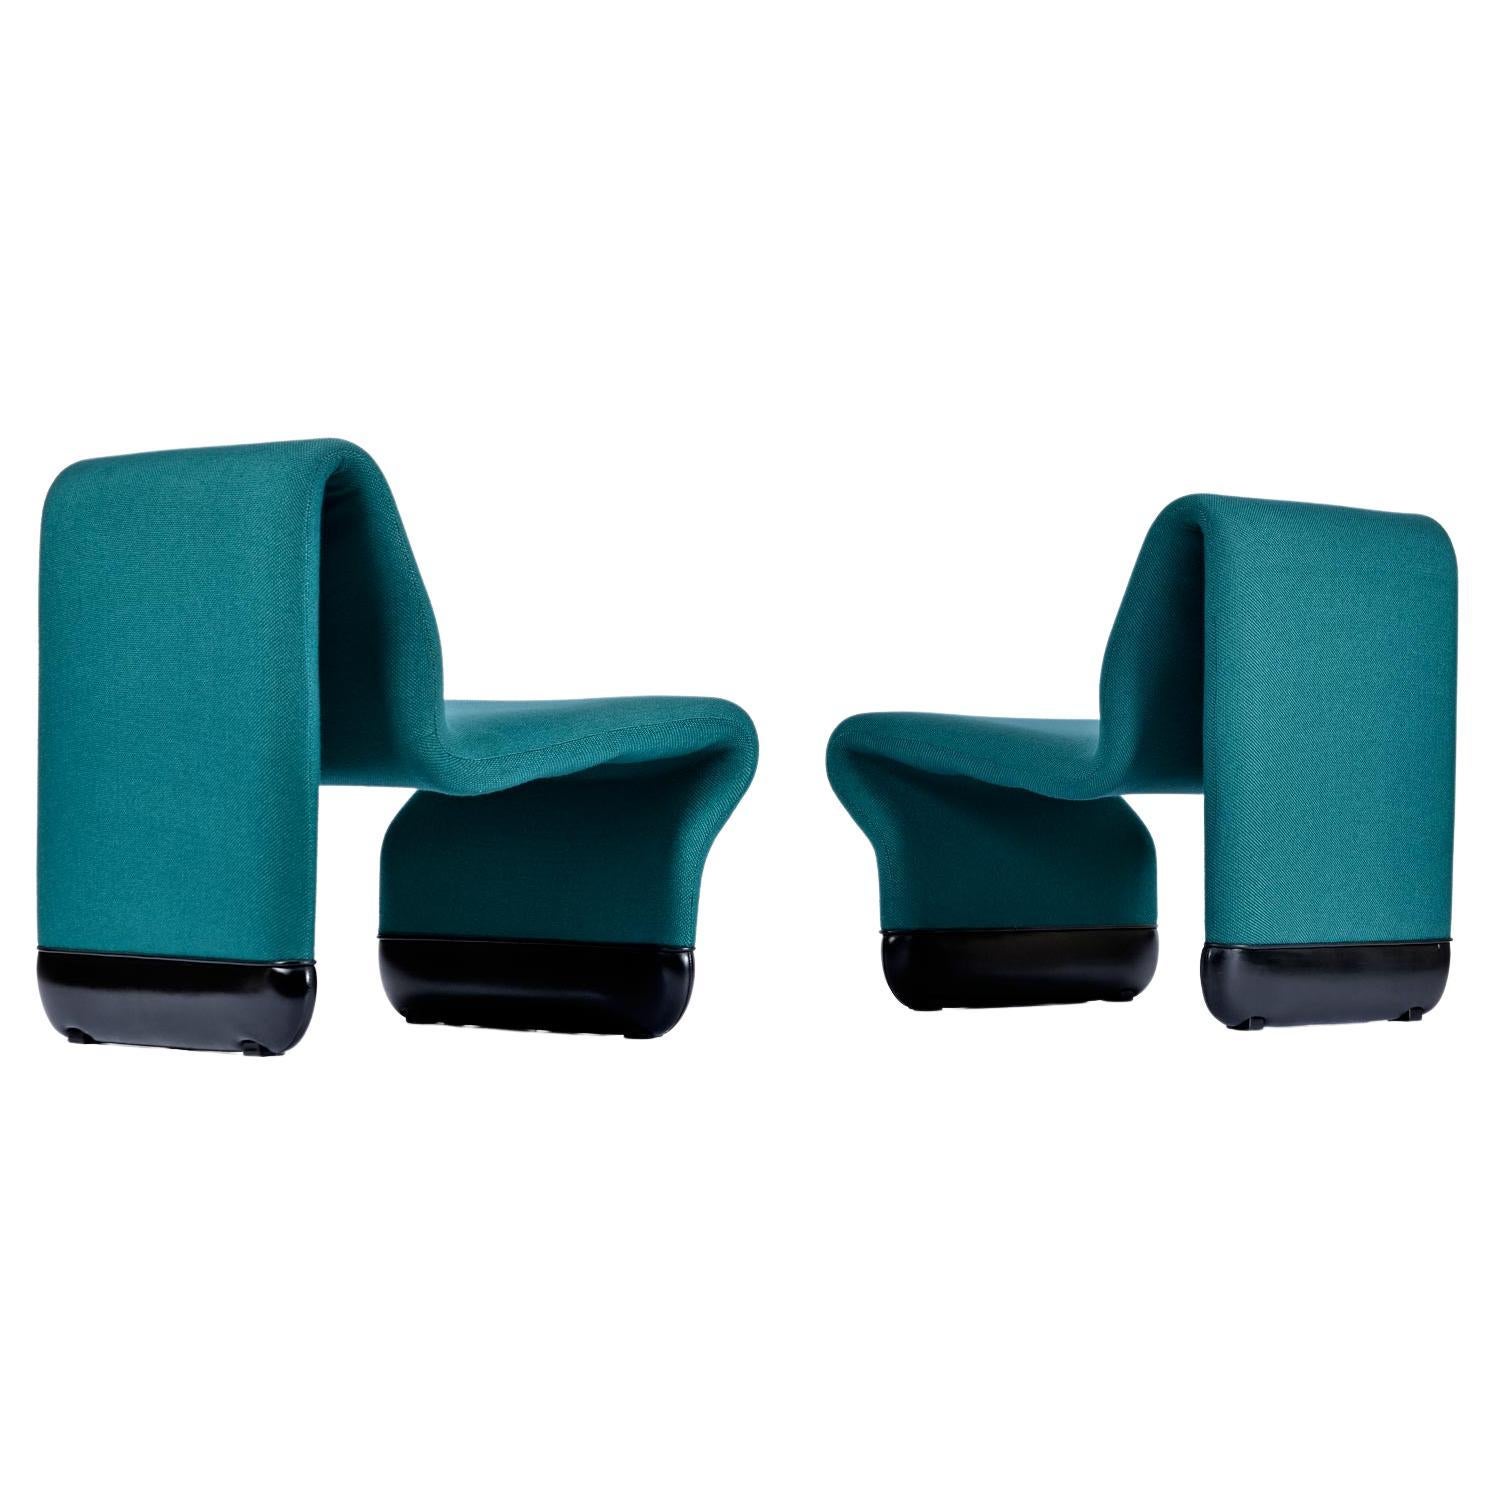 We can neither confirm nor deny that these Paul Boulva suspension chairs have seen screen time on Start Trek: The Next Generation, but the teal color resemblance to the Ten Forward chairs is uncanny. The elusiveness of this line makes their